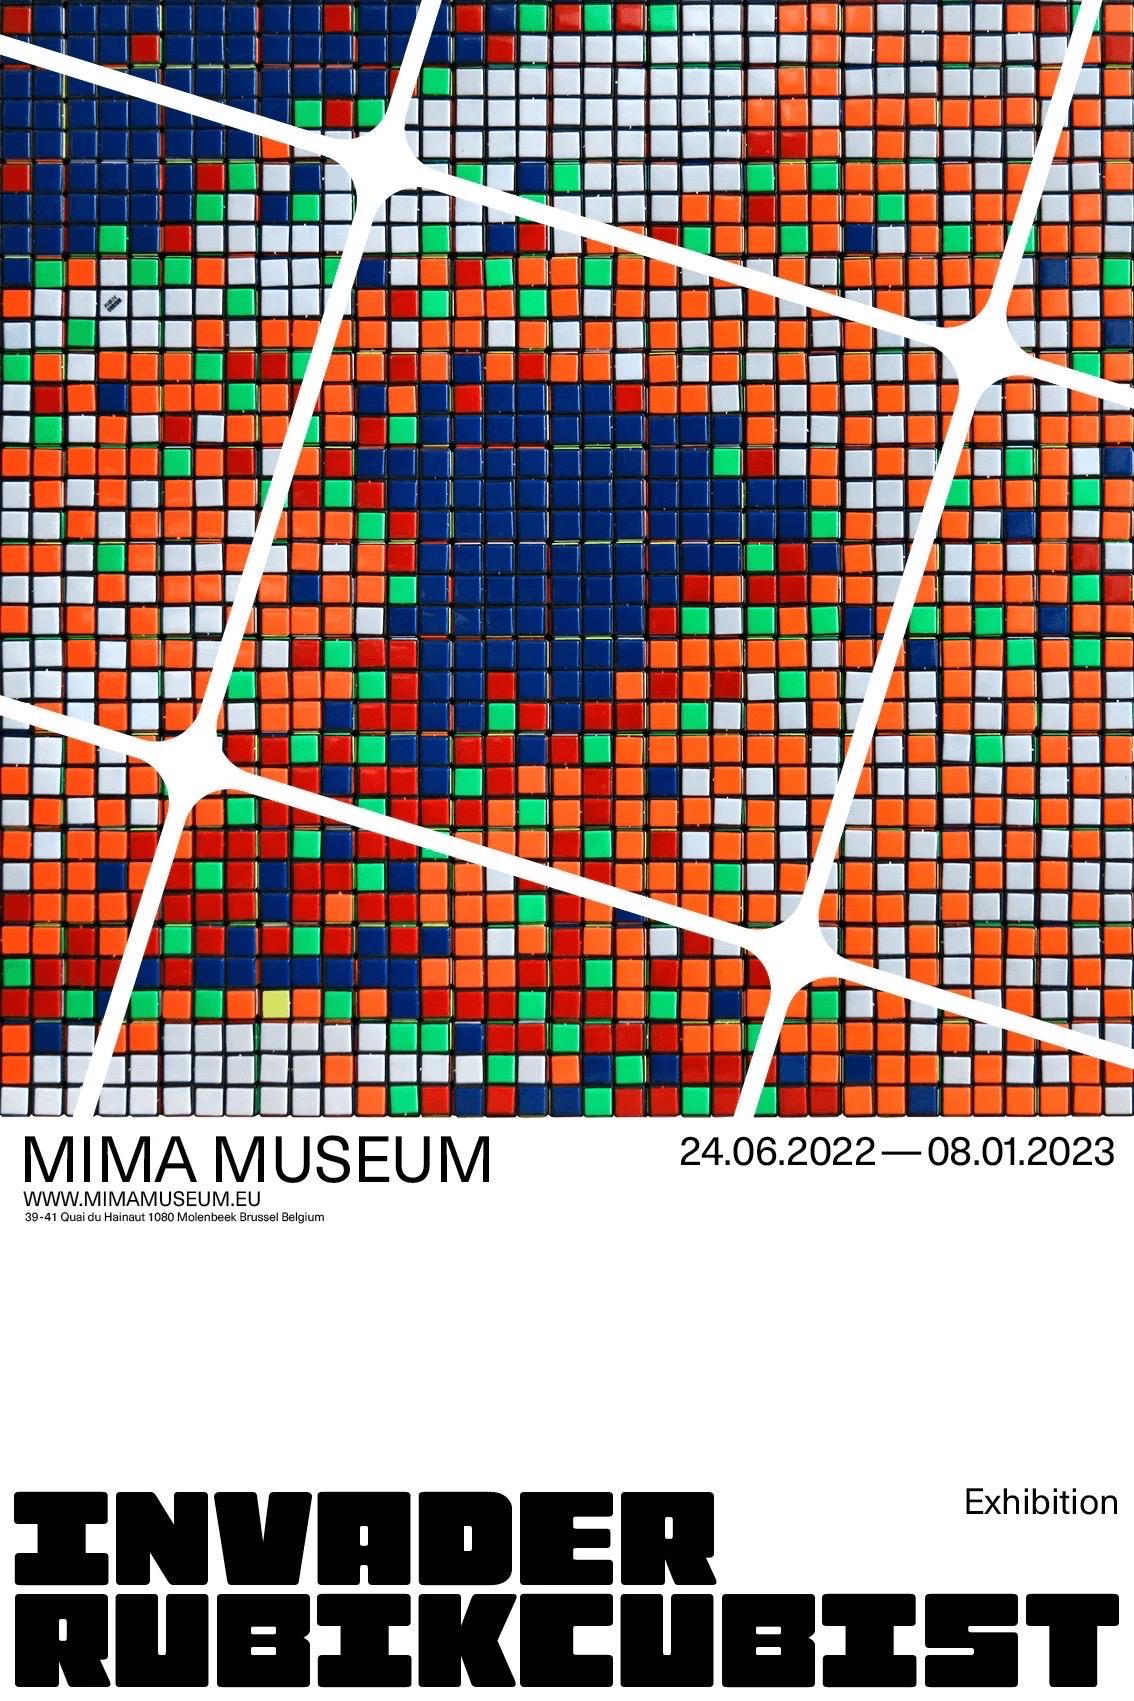 Invader, Rubikcubist MIMA Poster, 2022


Offset lithograph in colour on 130gsm Arctic Volume Silk poster paper from Invader's MIMA gallery show in Brussels 
40 x 60 cm (15.7 x 23.6 in)
Open Edition